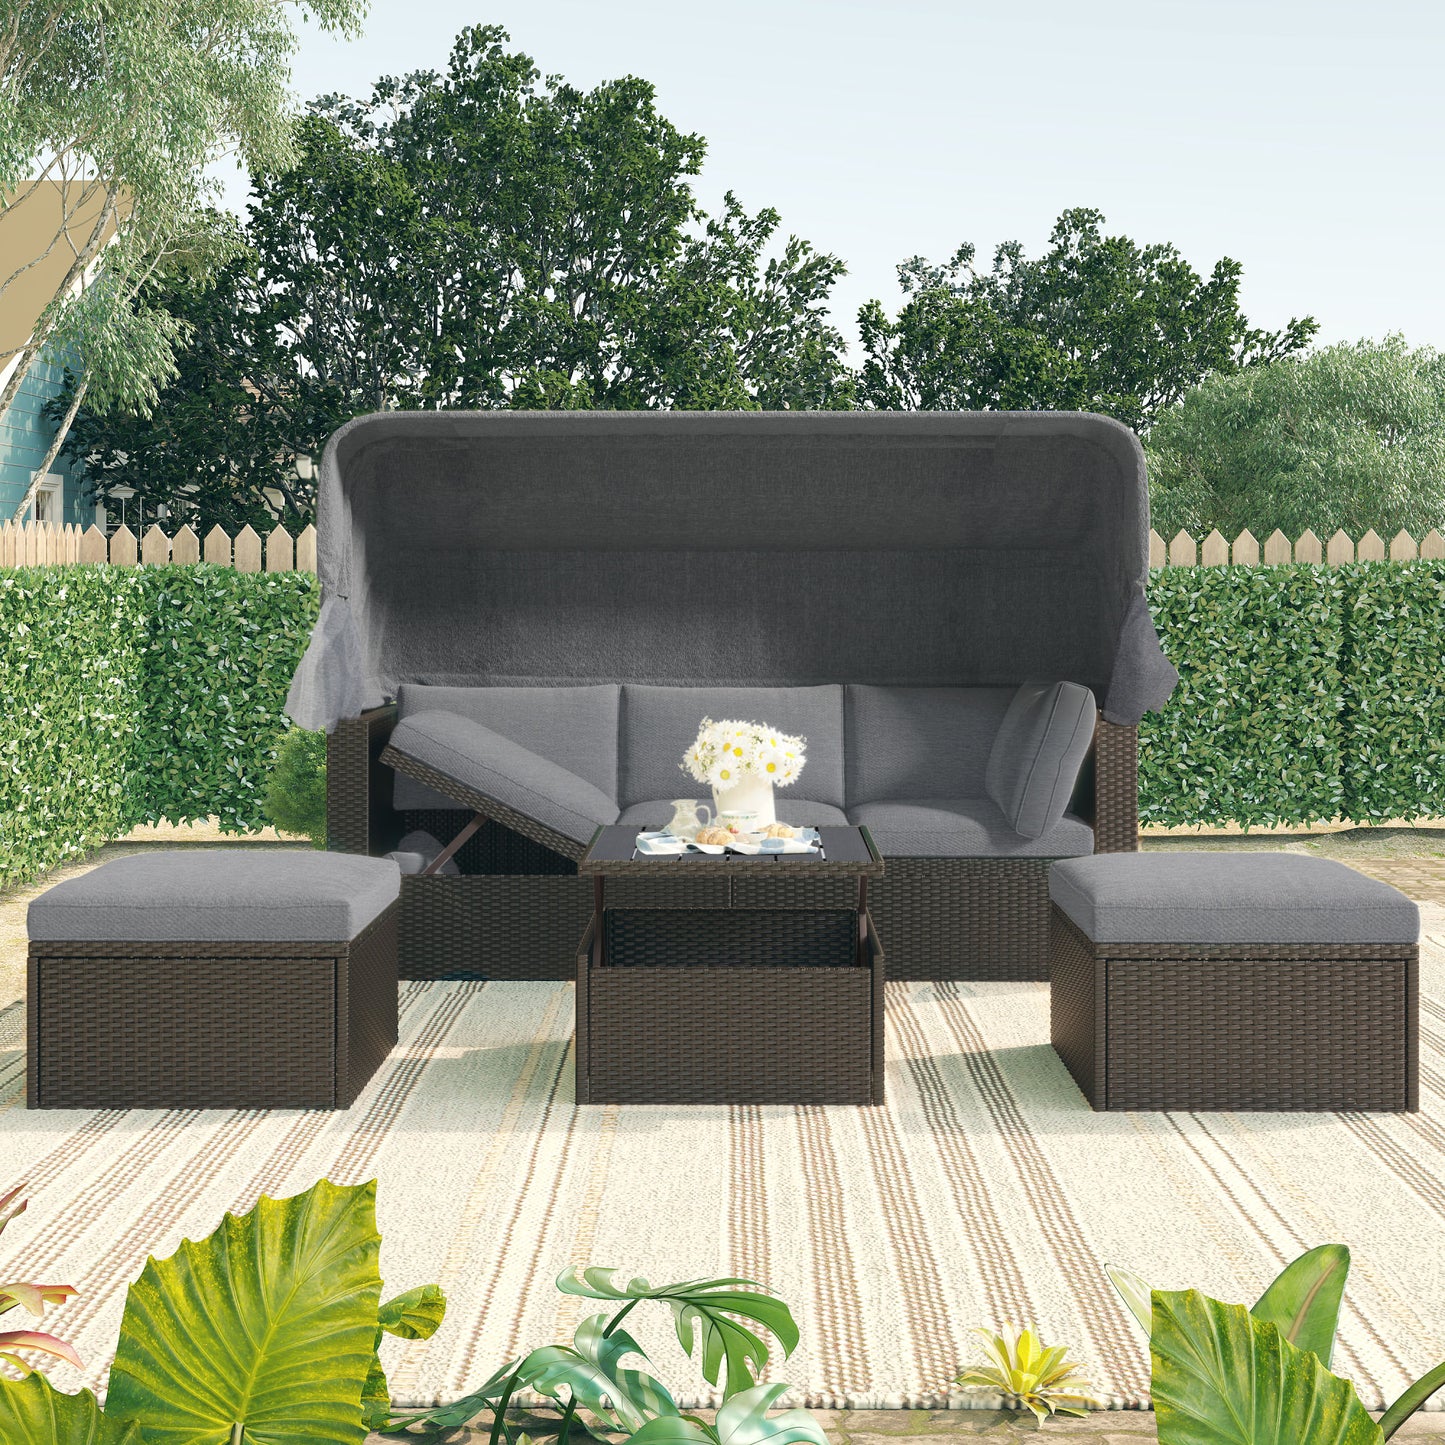 Outdoor Patio Rectangle Daybed with Retractable Canopy